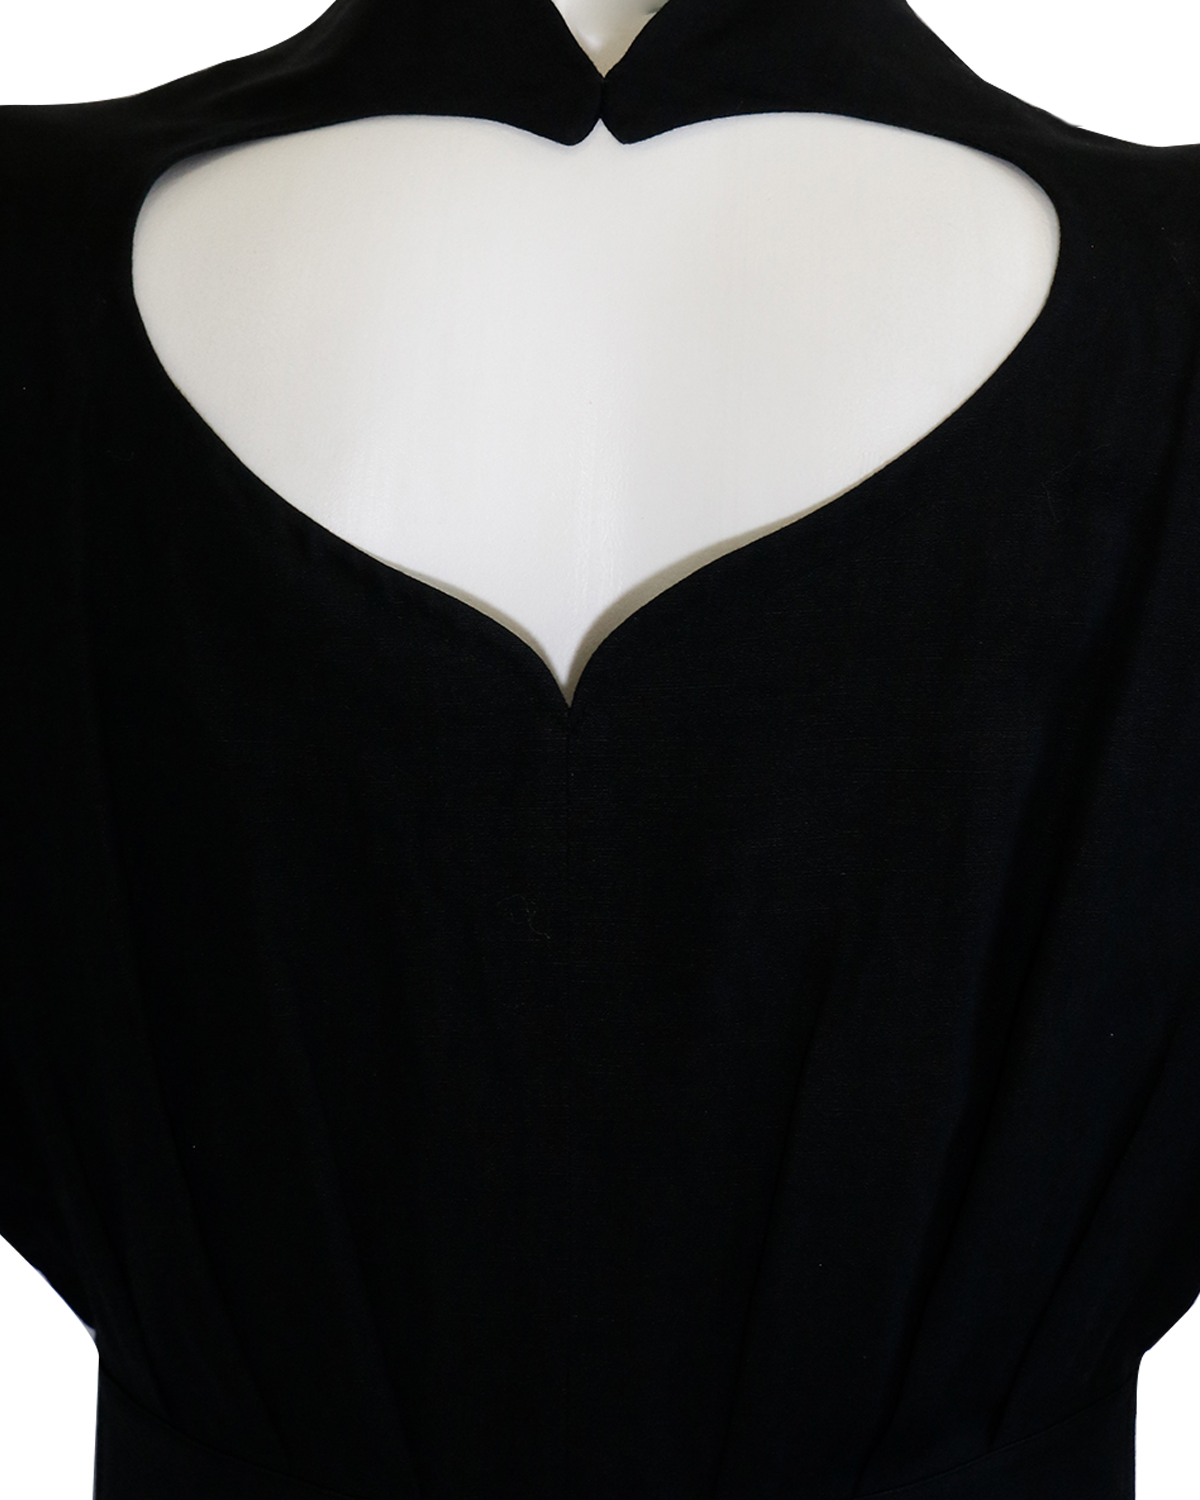 Thierry Mugler Black Dress from 1990s